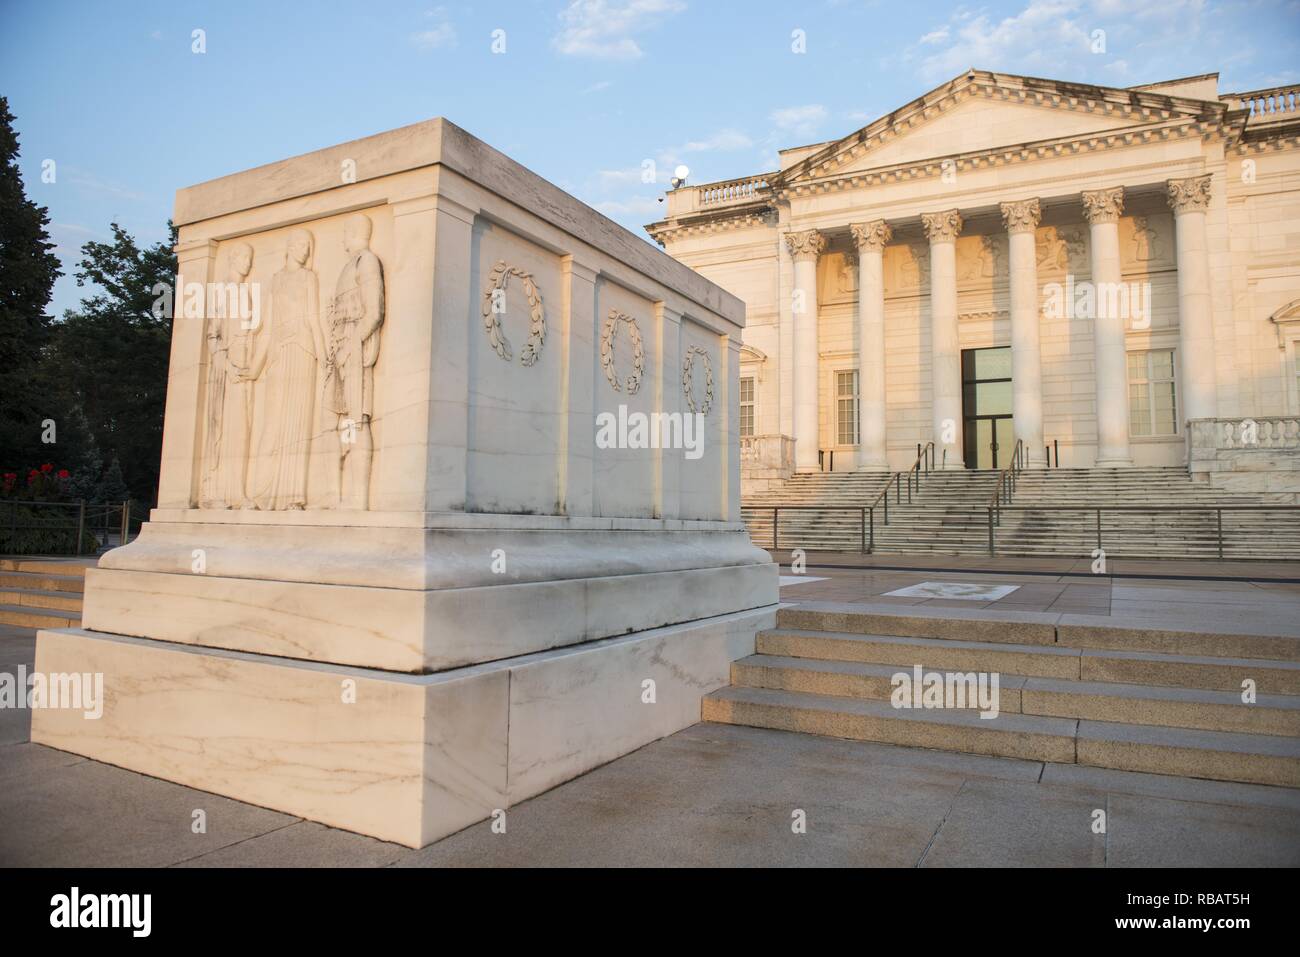 Color photograph of the East and North facing panels of the Tomb of the Unknown Soldier, shot from a low angle, with a bas-relief carving depicting the Classical allegorical figures Peace, Victory, and Valor visible on the East side, wreaths visible on the North side, and with the eastern entrance to the the Arlington Memorial Amphitheater in the background, located at Arlington National Cemetery, in Arlington, Virginia, USA, image courtesy Elizabeth Fraser and the Arlington National Cemetery, August 7, 2018. () Stock Photo